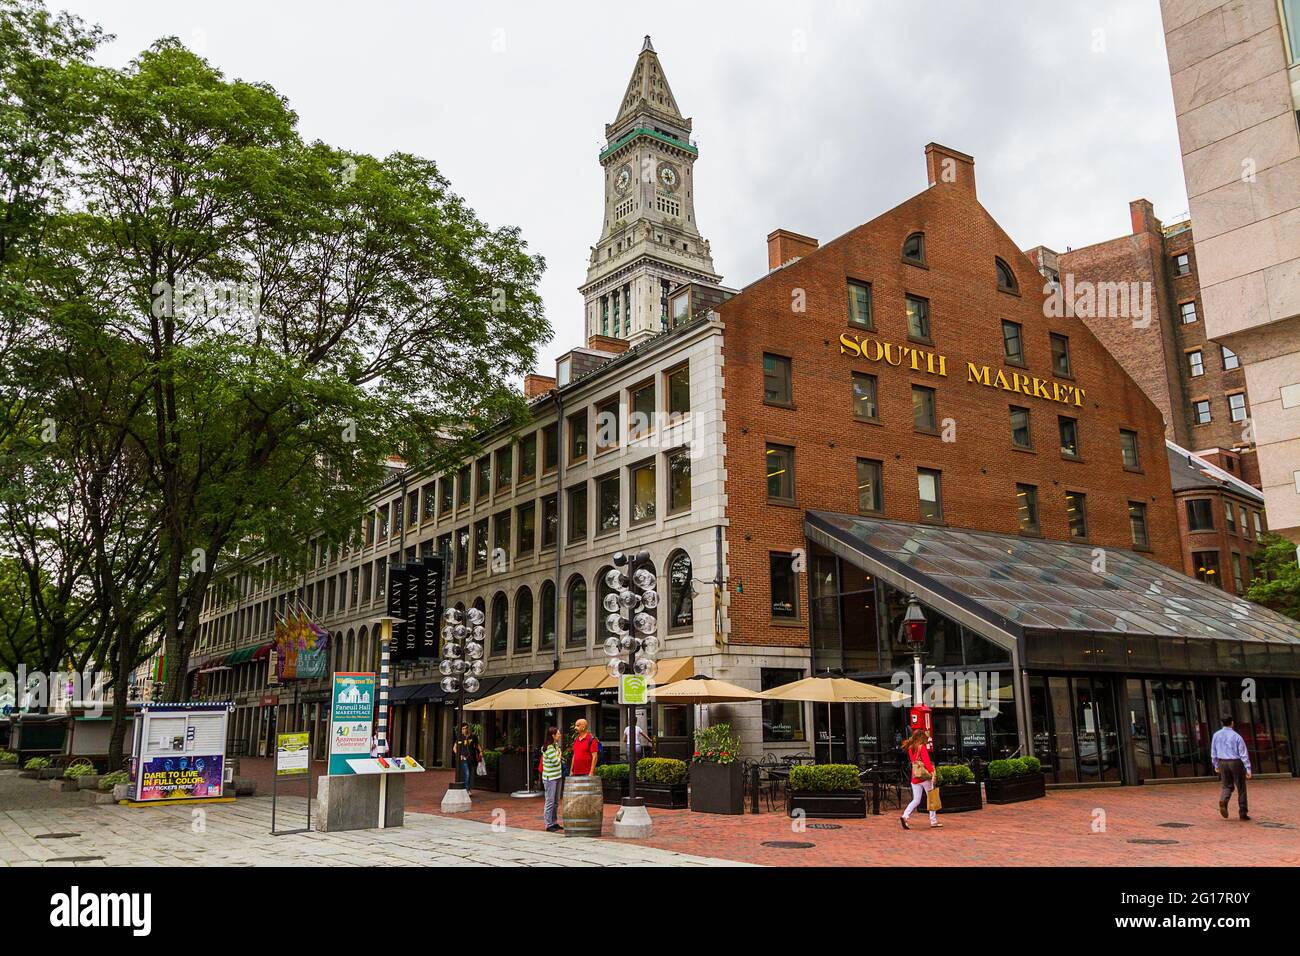 Street view of South Market in Boston Stock Photo